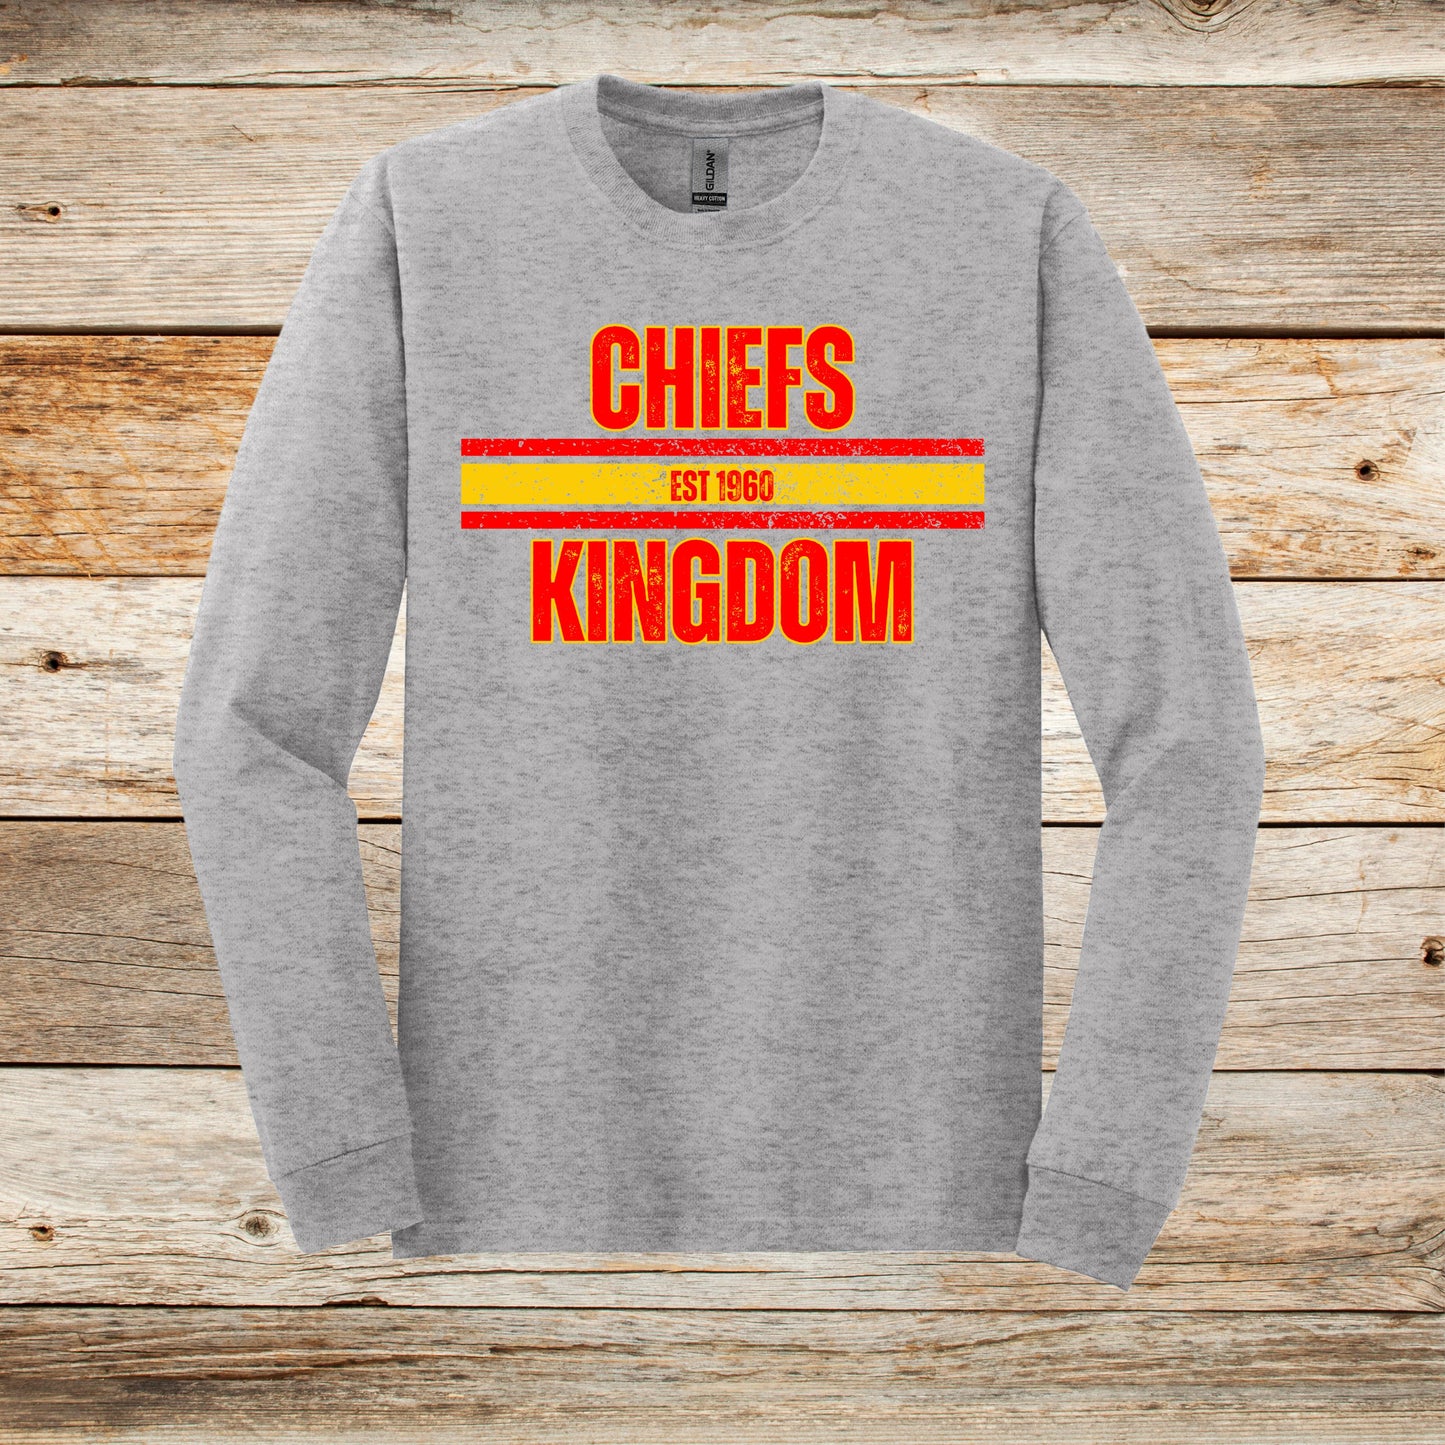 Football Long Sleeve T-Shirt - Chiefs Football - Chiefs Kingdom - Adult and Children's Tee Shirts - Sports Long Sleeve T-Shirts Graphic Avenue Sport Grey Adult Small 